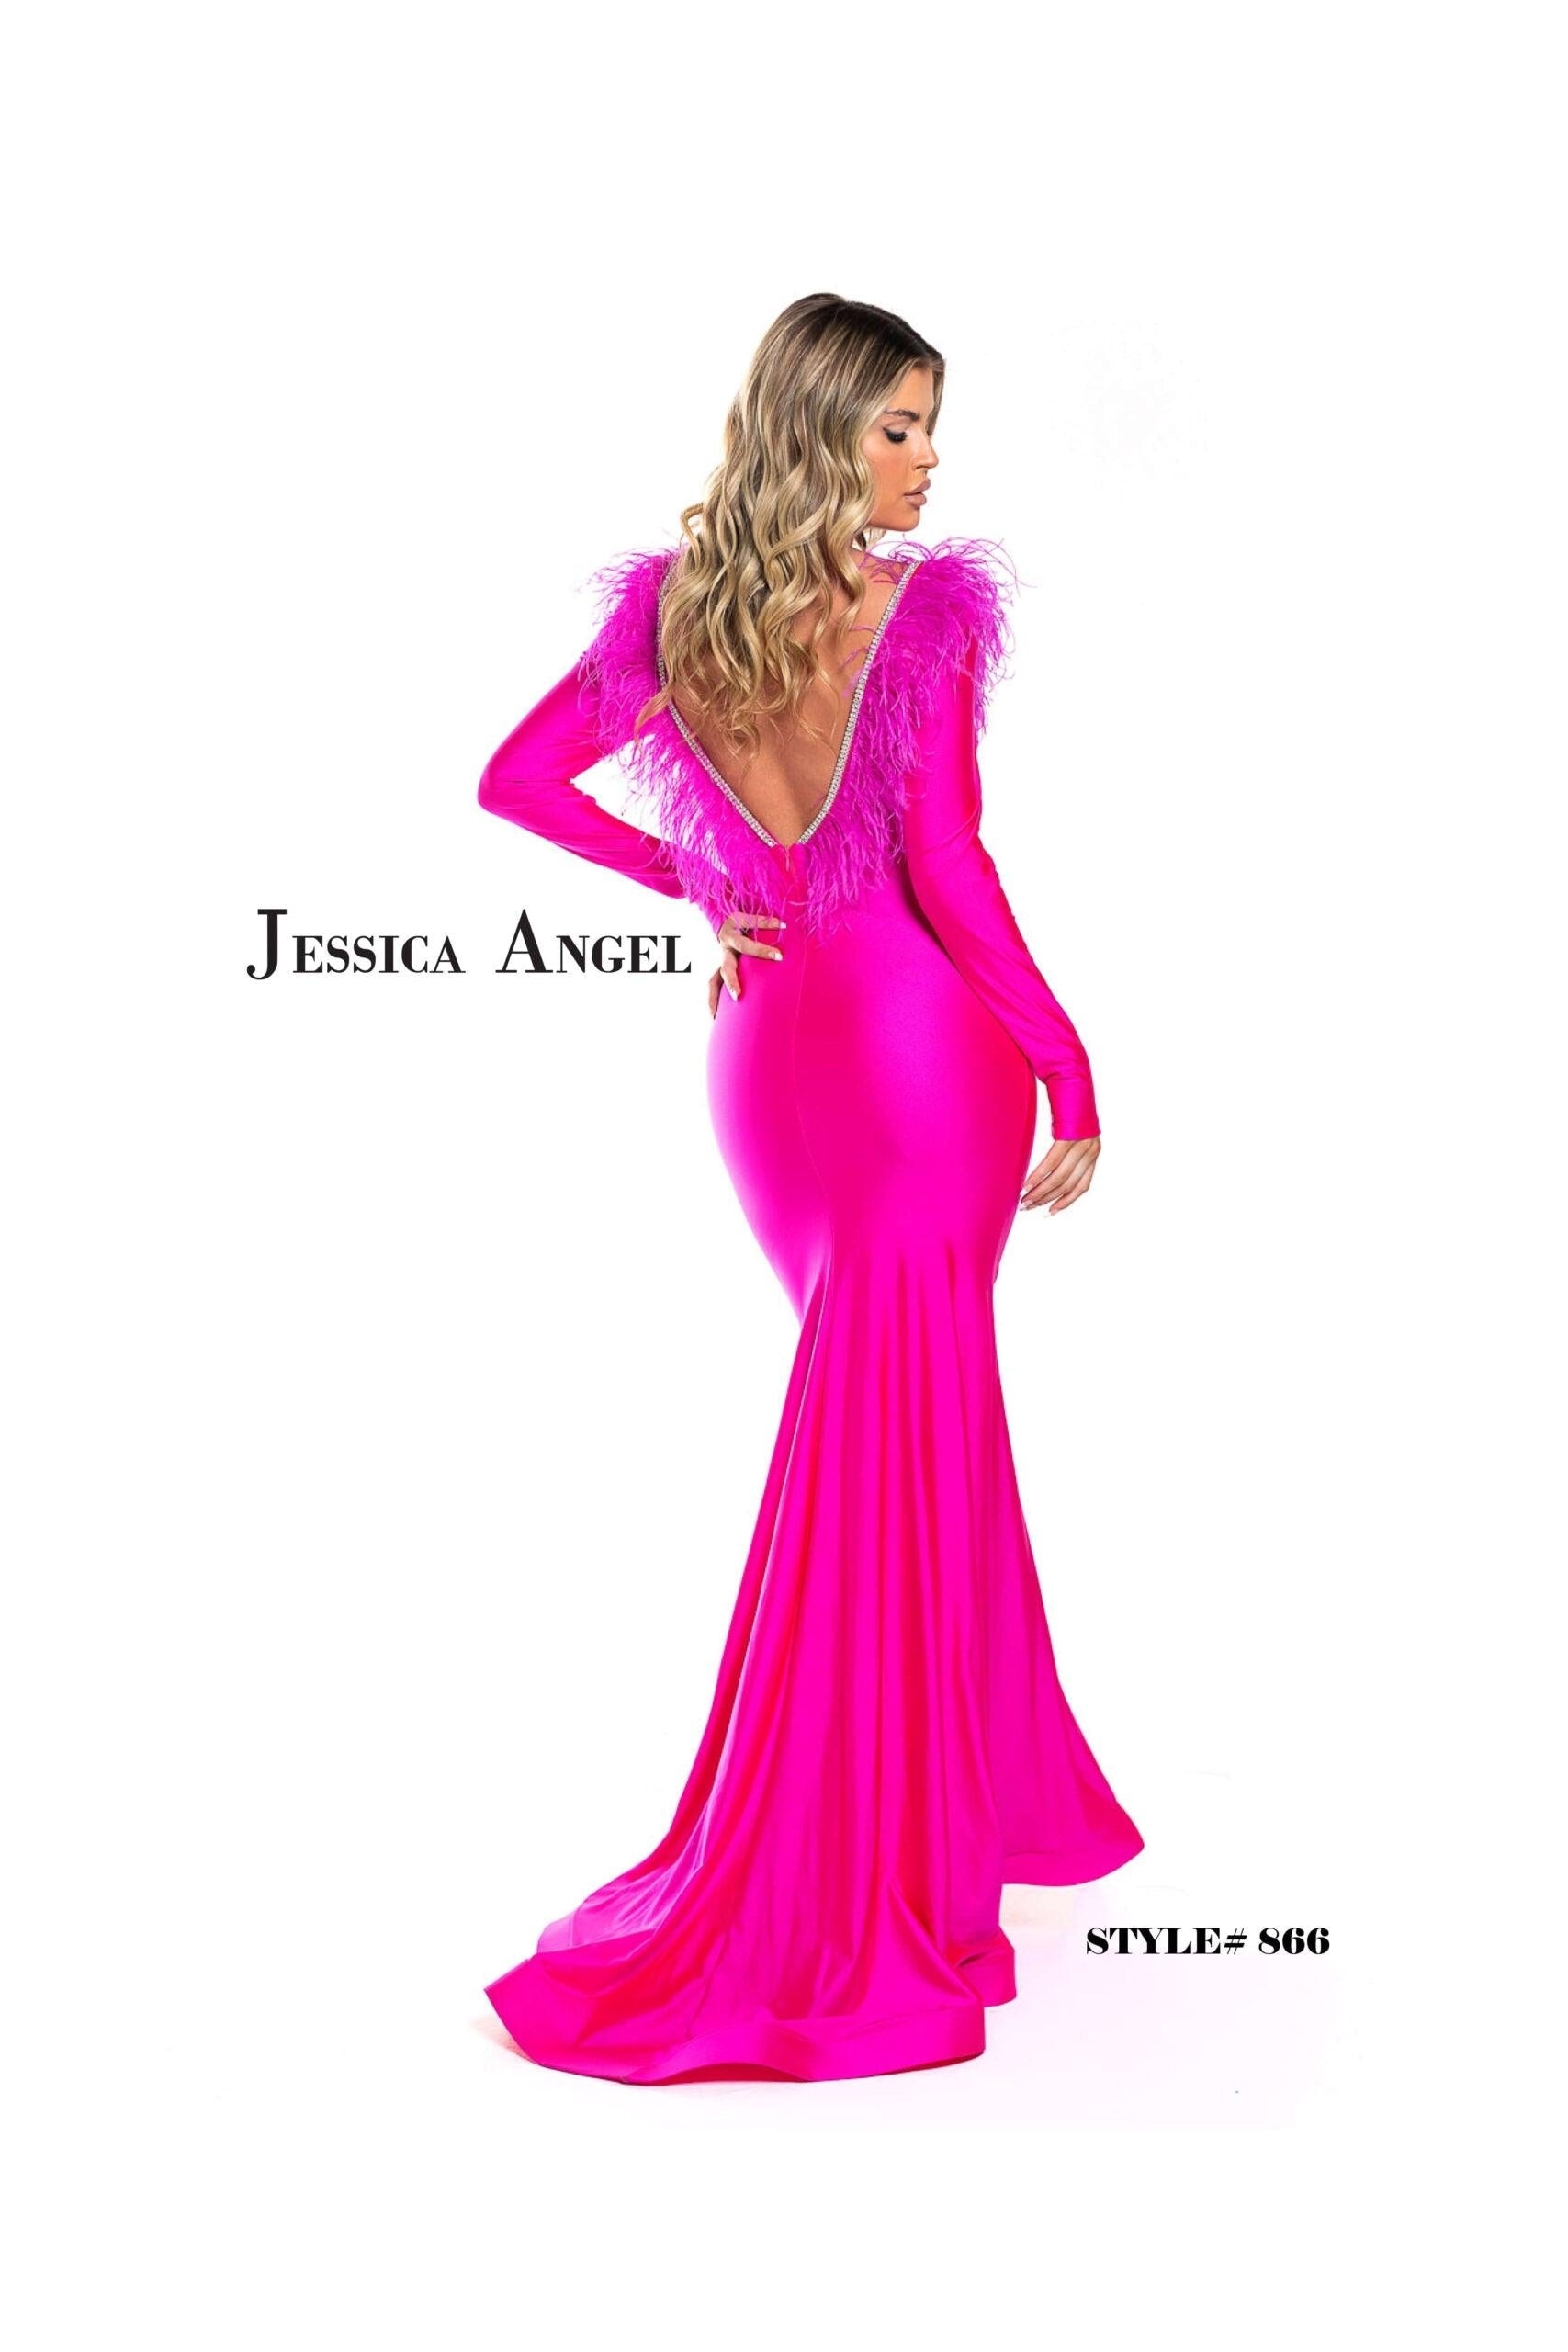 Jessica Angel Long Sleeve Fitted Formal Dress 866 - The Dress Outlet